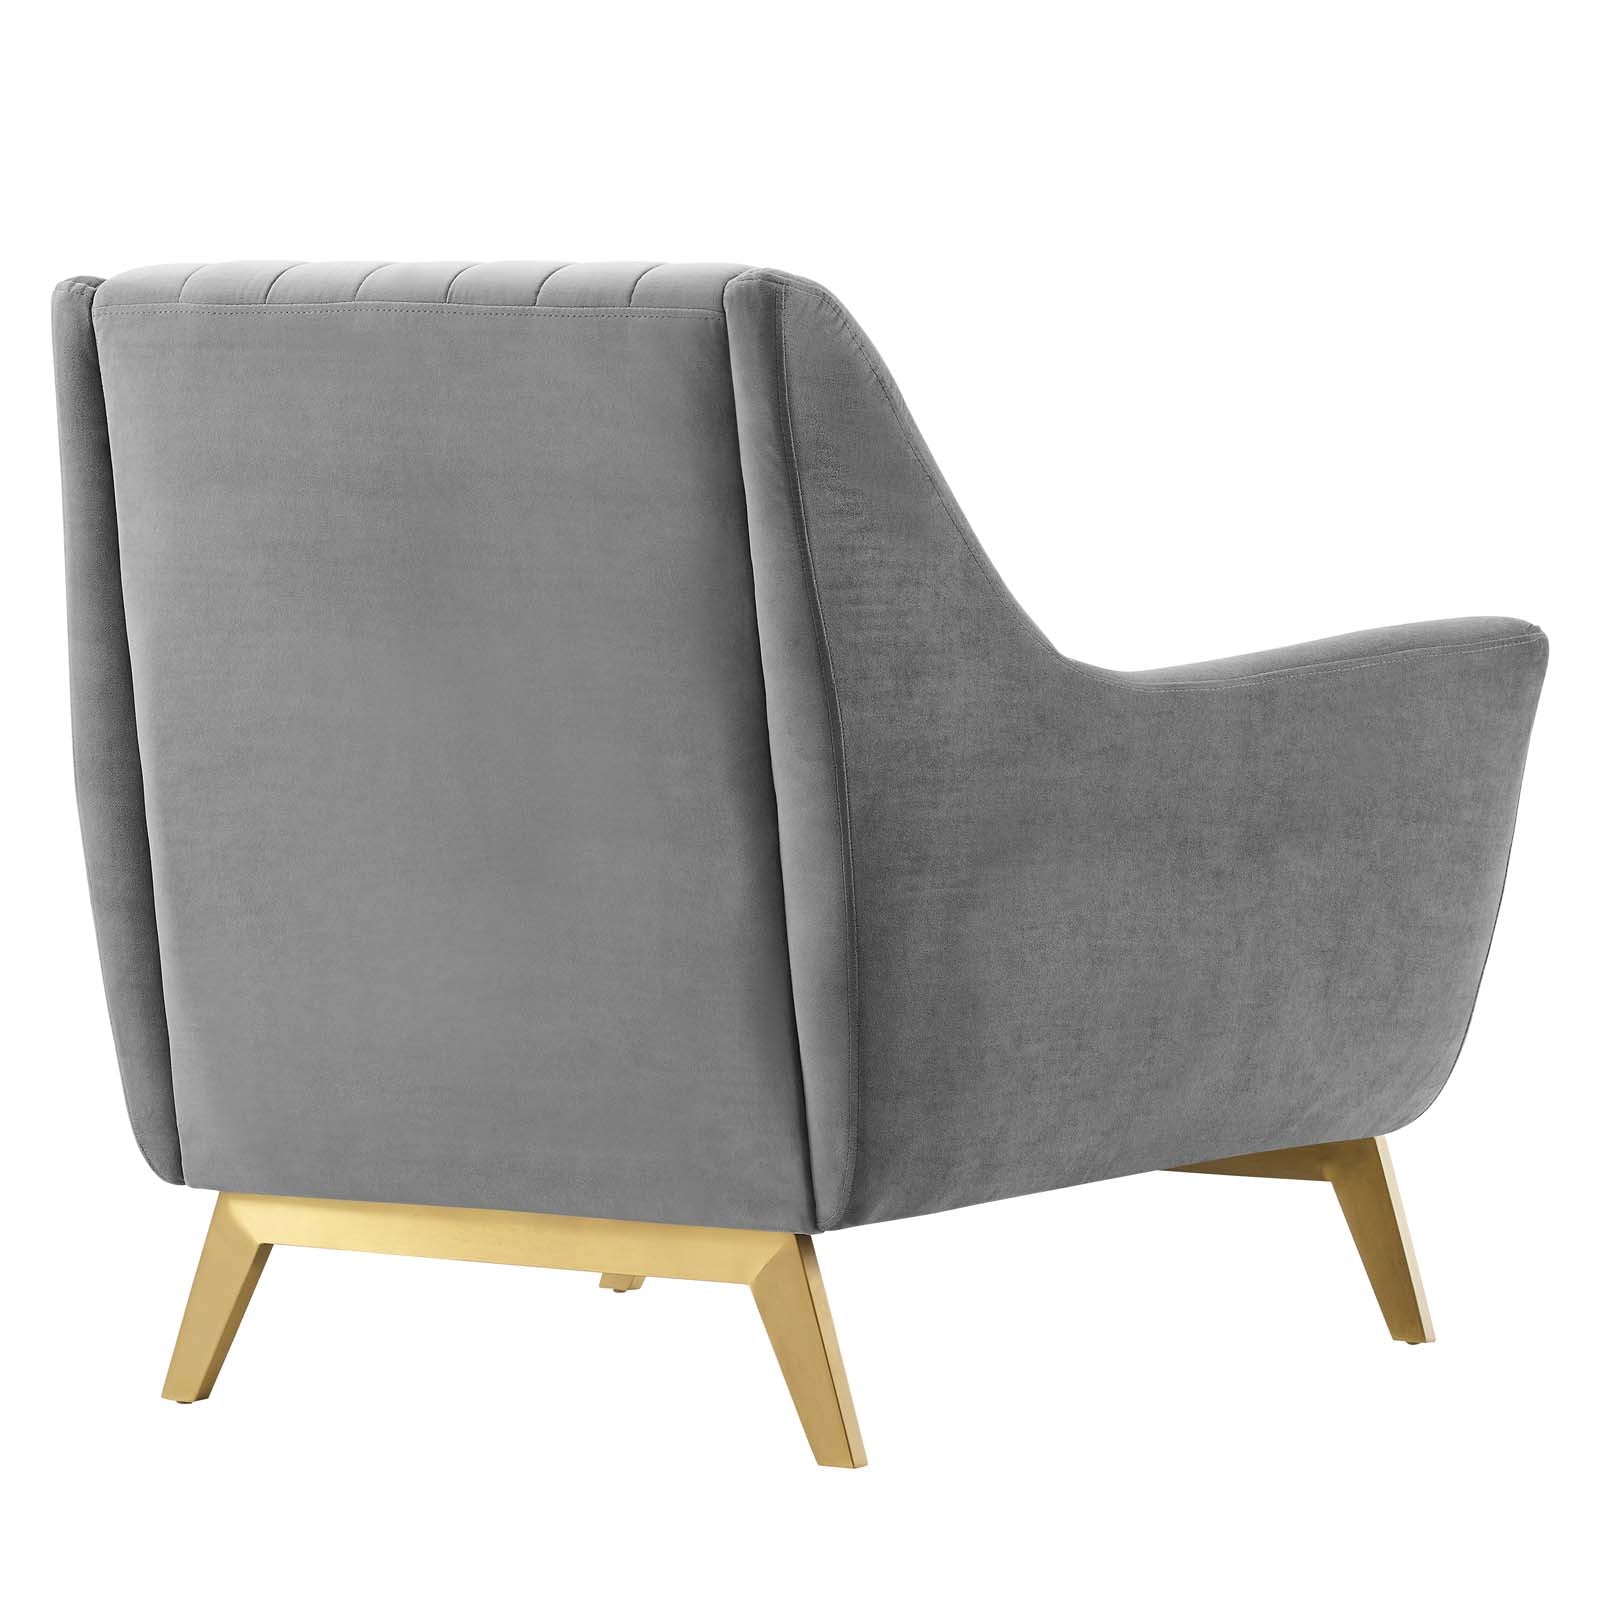 Modway Accent Chairs - Winsome Channel Tufted Performance Velvet Armchair Gray